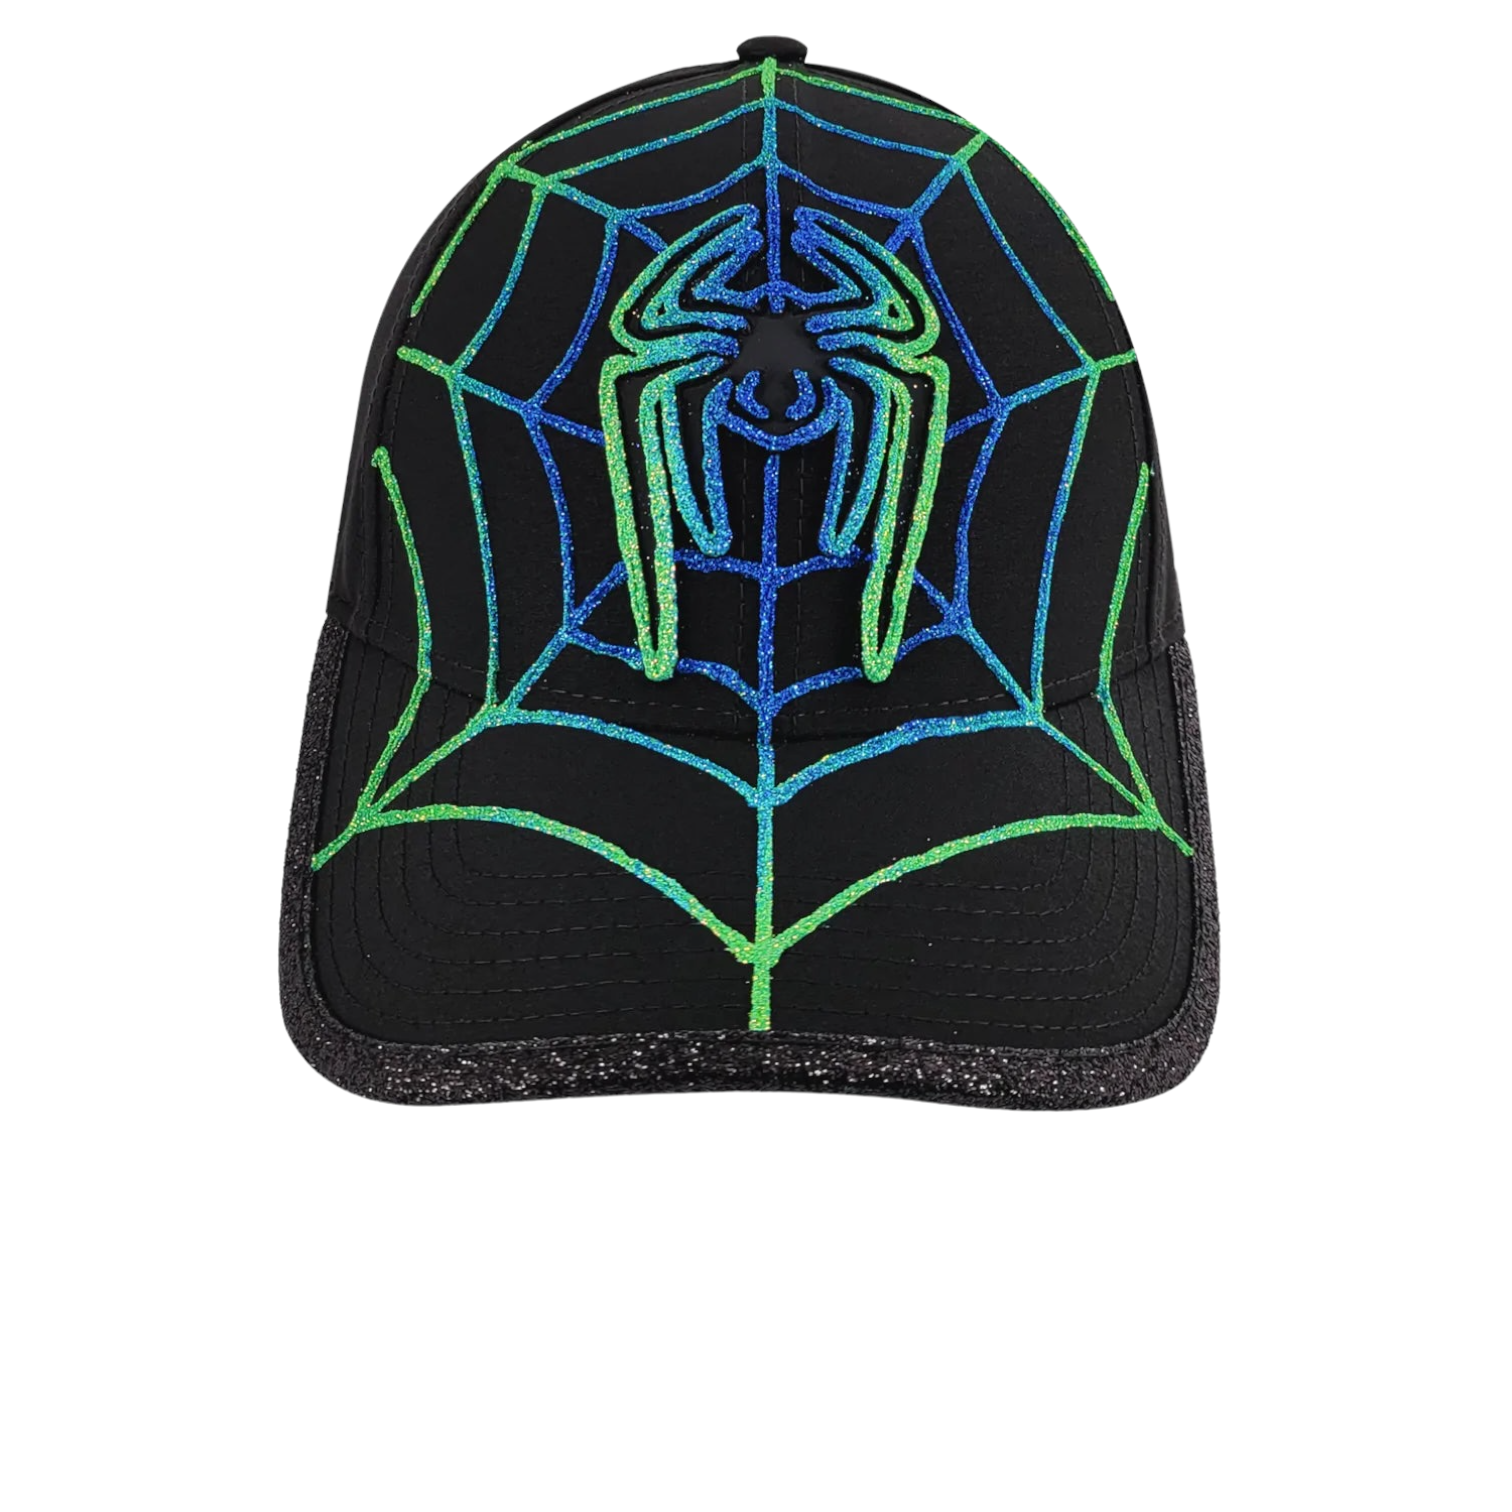 Casquette Spider Iridescent Greenblue deluxe - Stayin